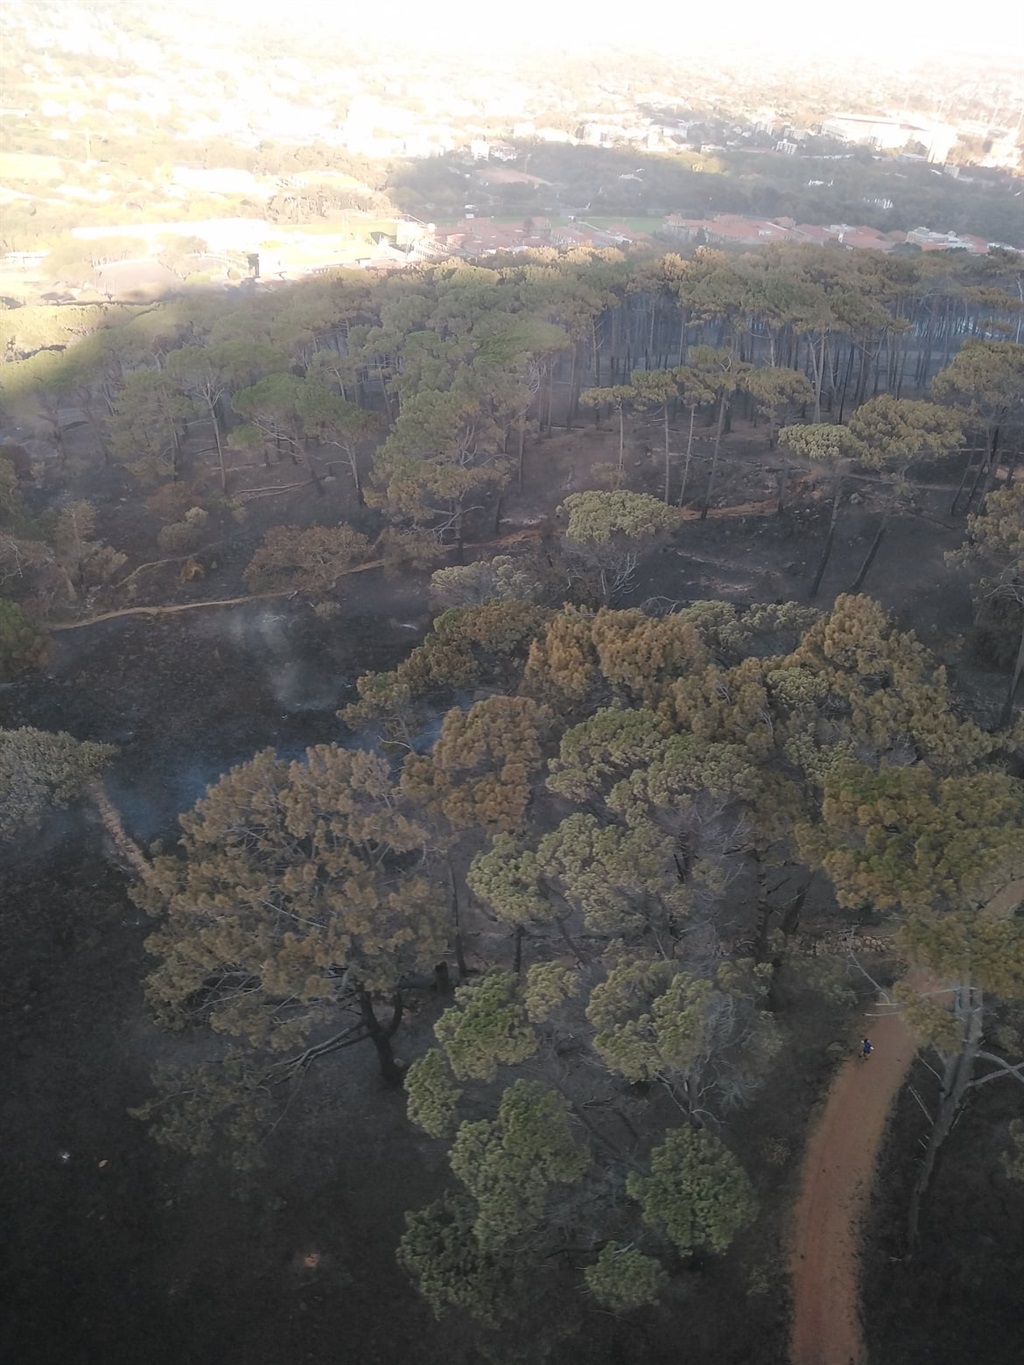 Aerial shot of the extent of the fire damage